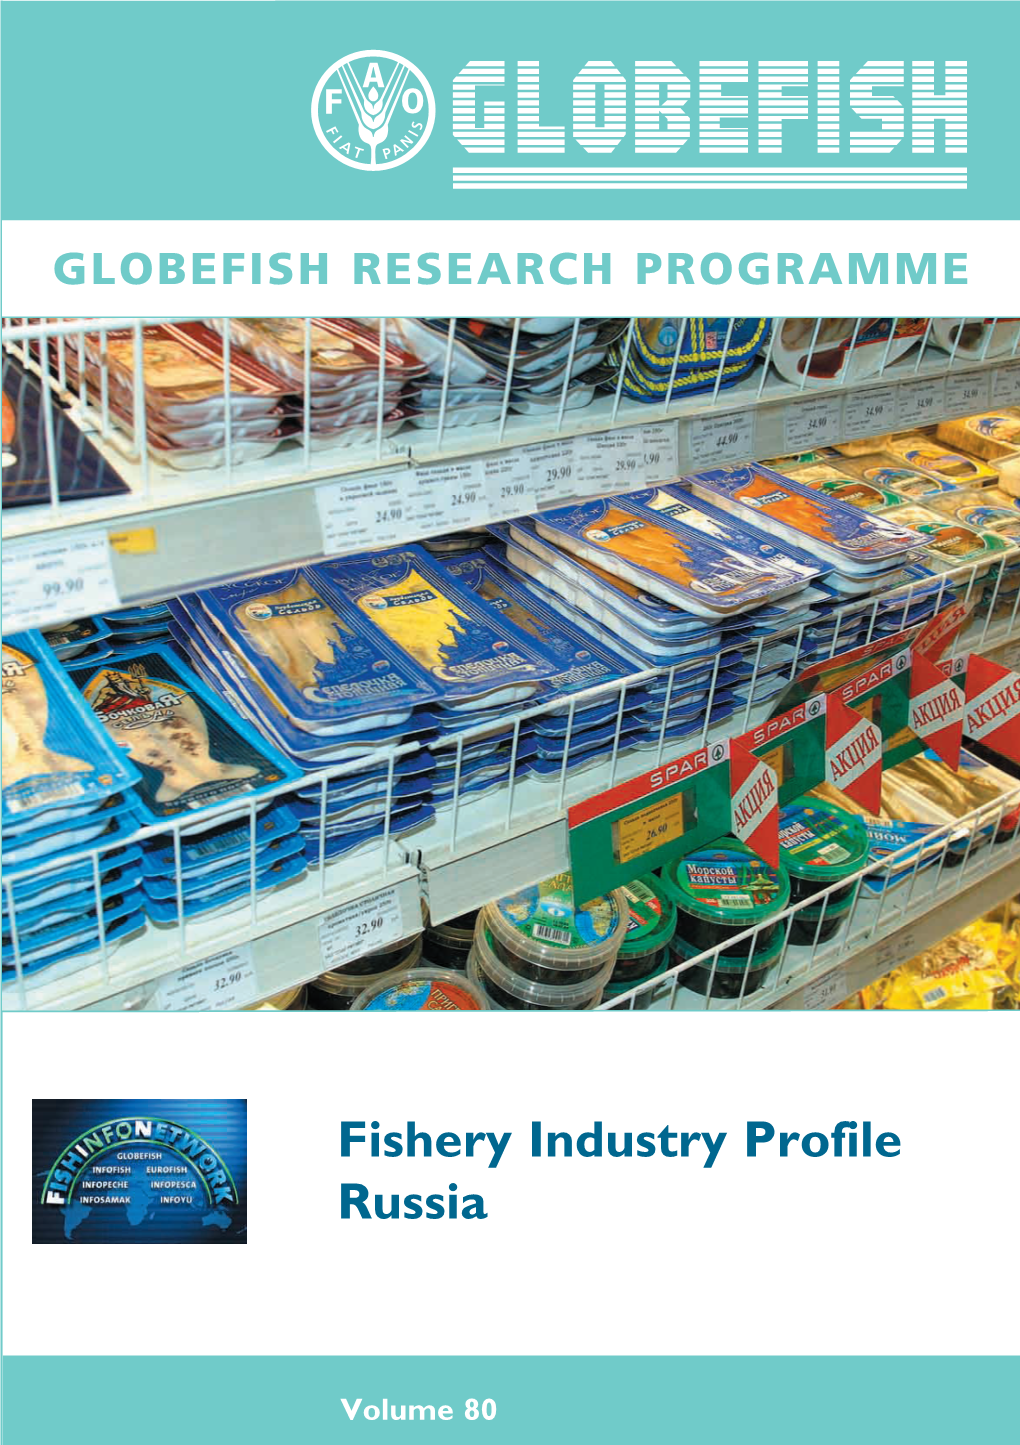 Russia - Profile Industry Fishery